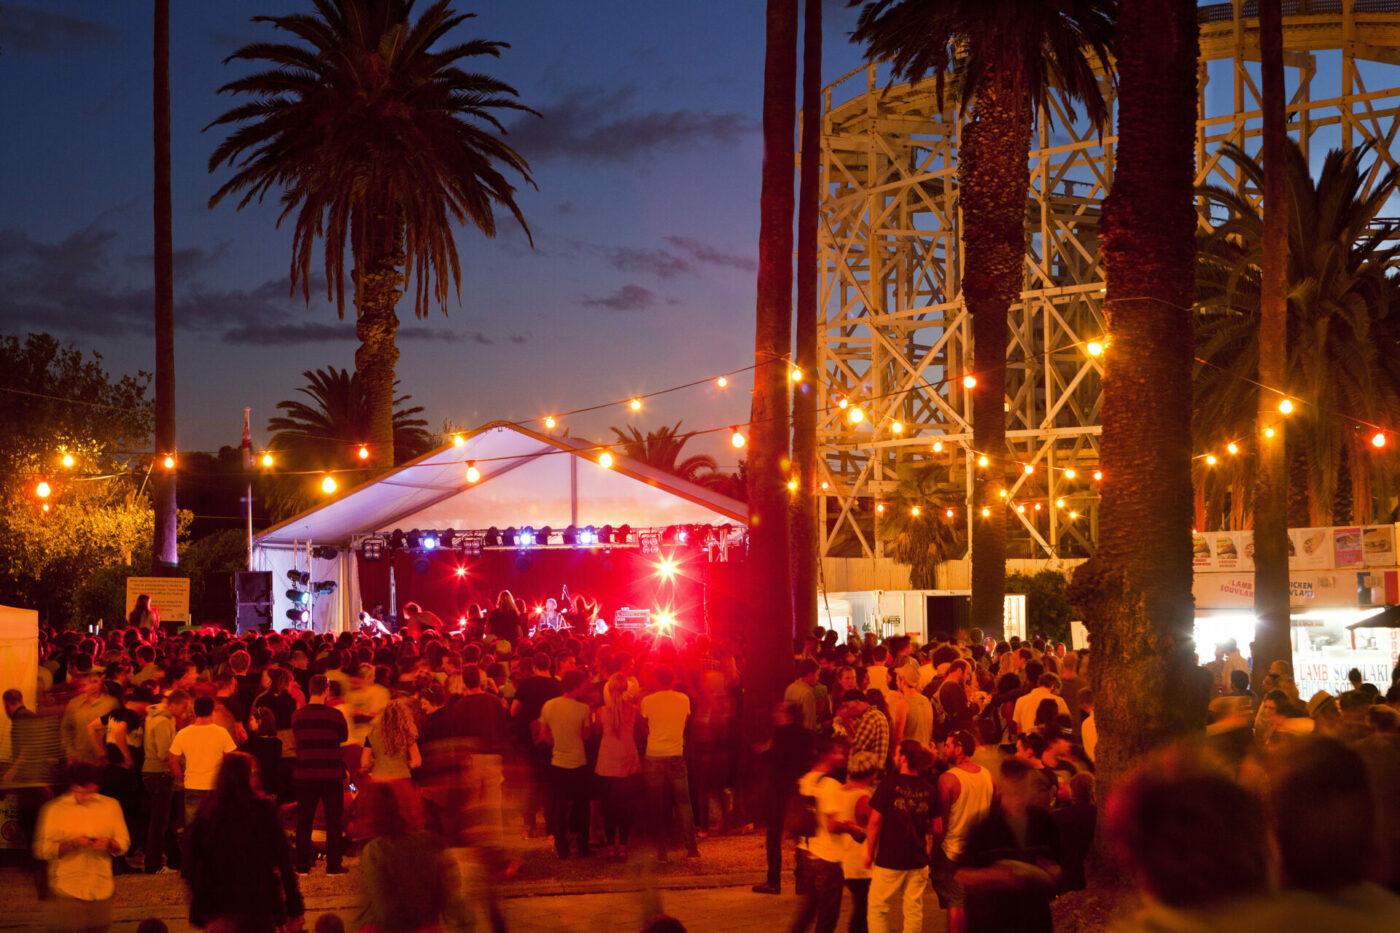 st kilda festival, things to do in melbourne